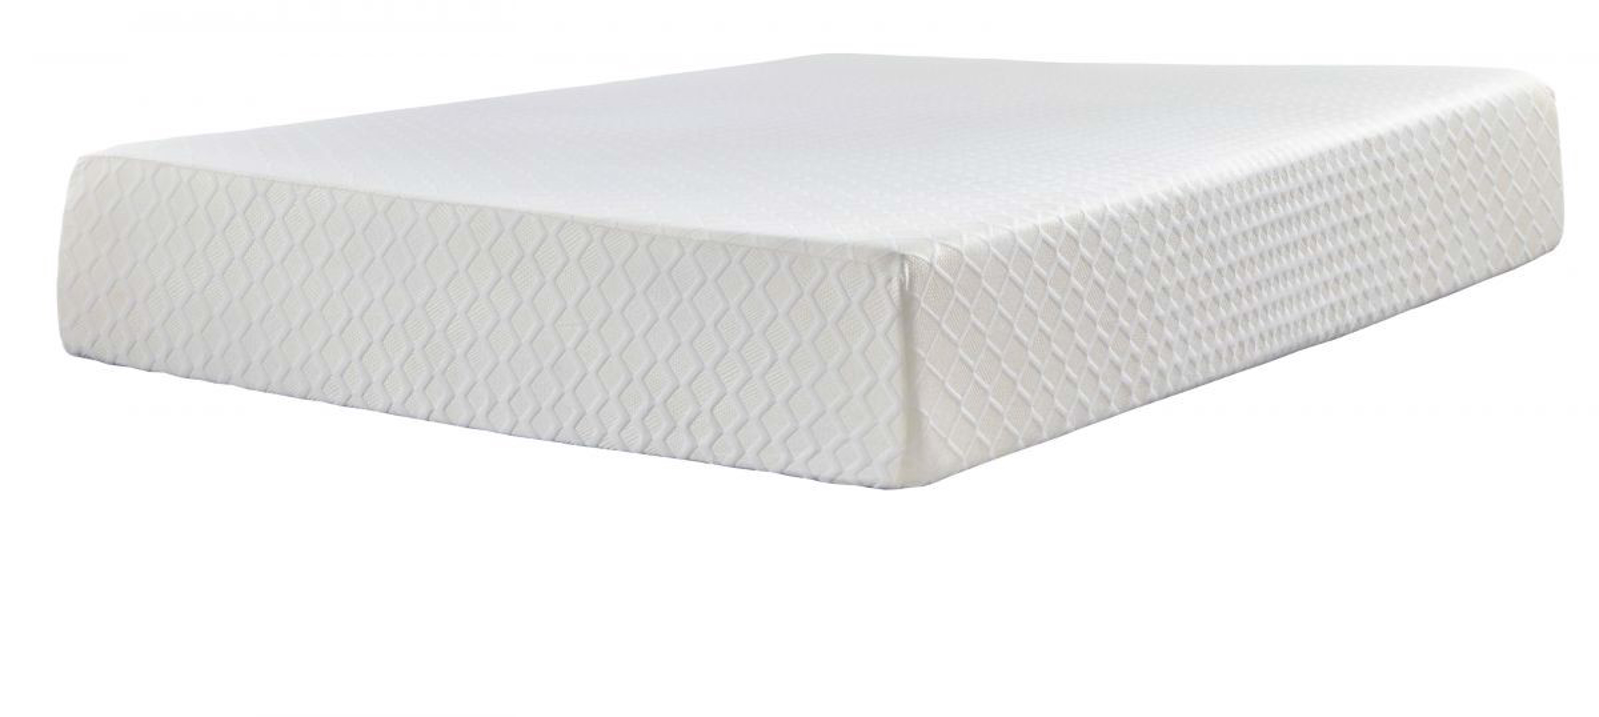 Picture of Chime 12in Memory Foam Mattress